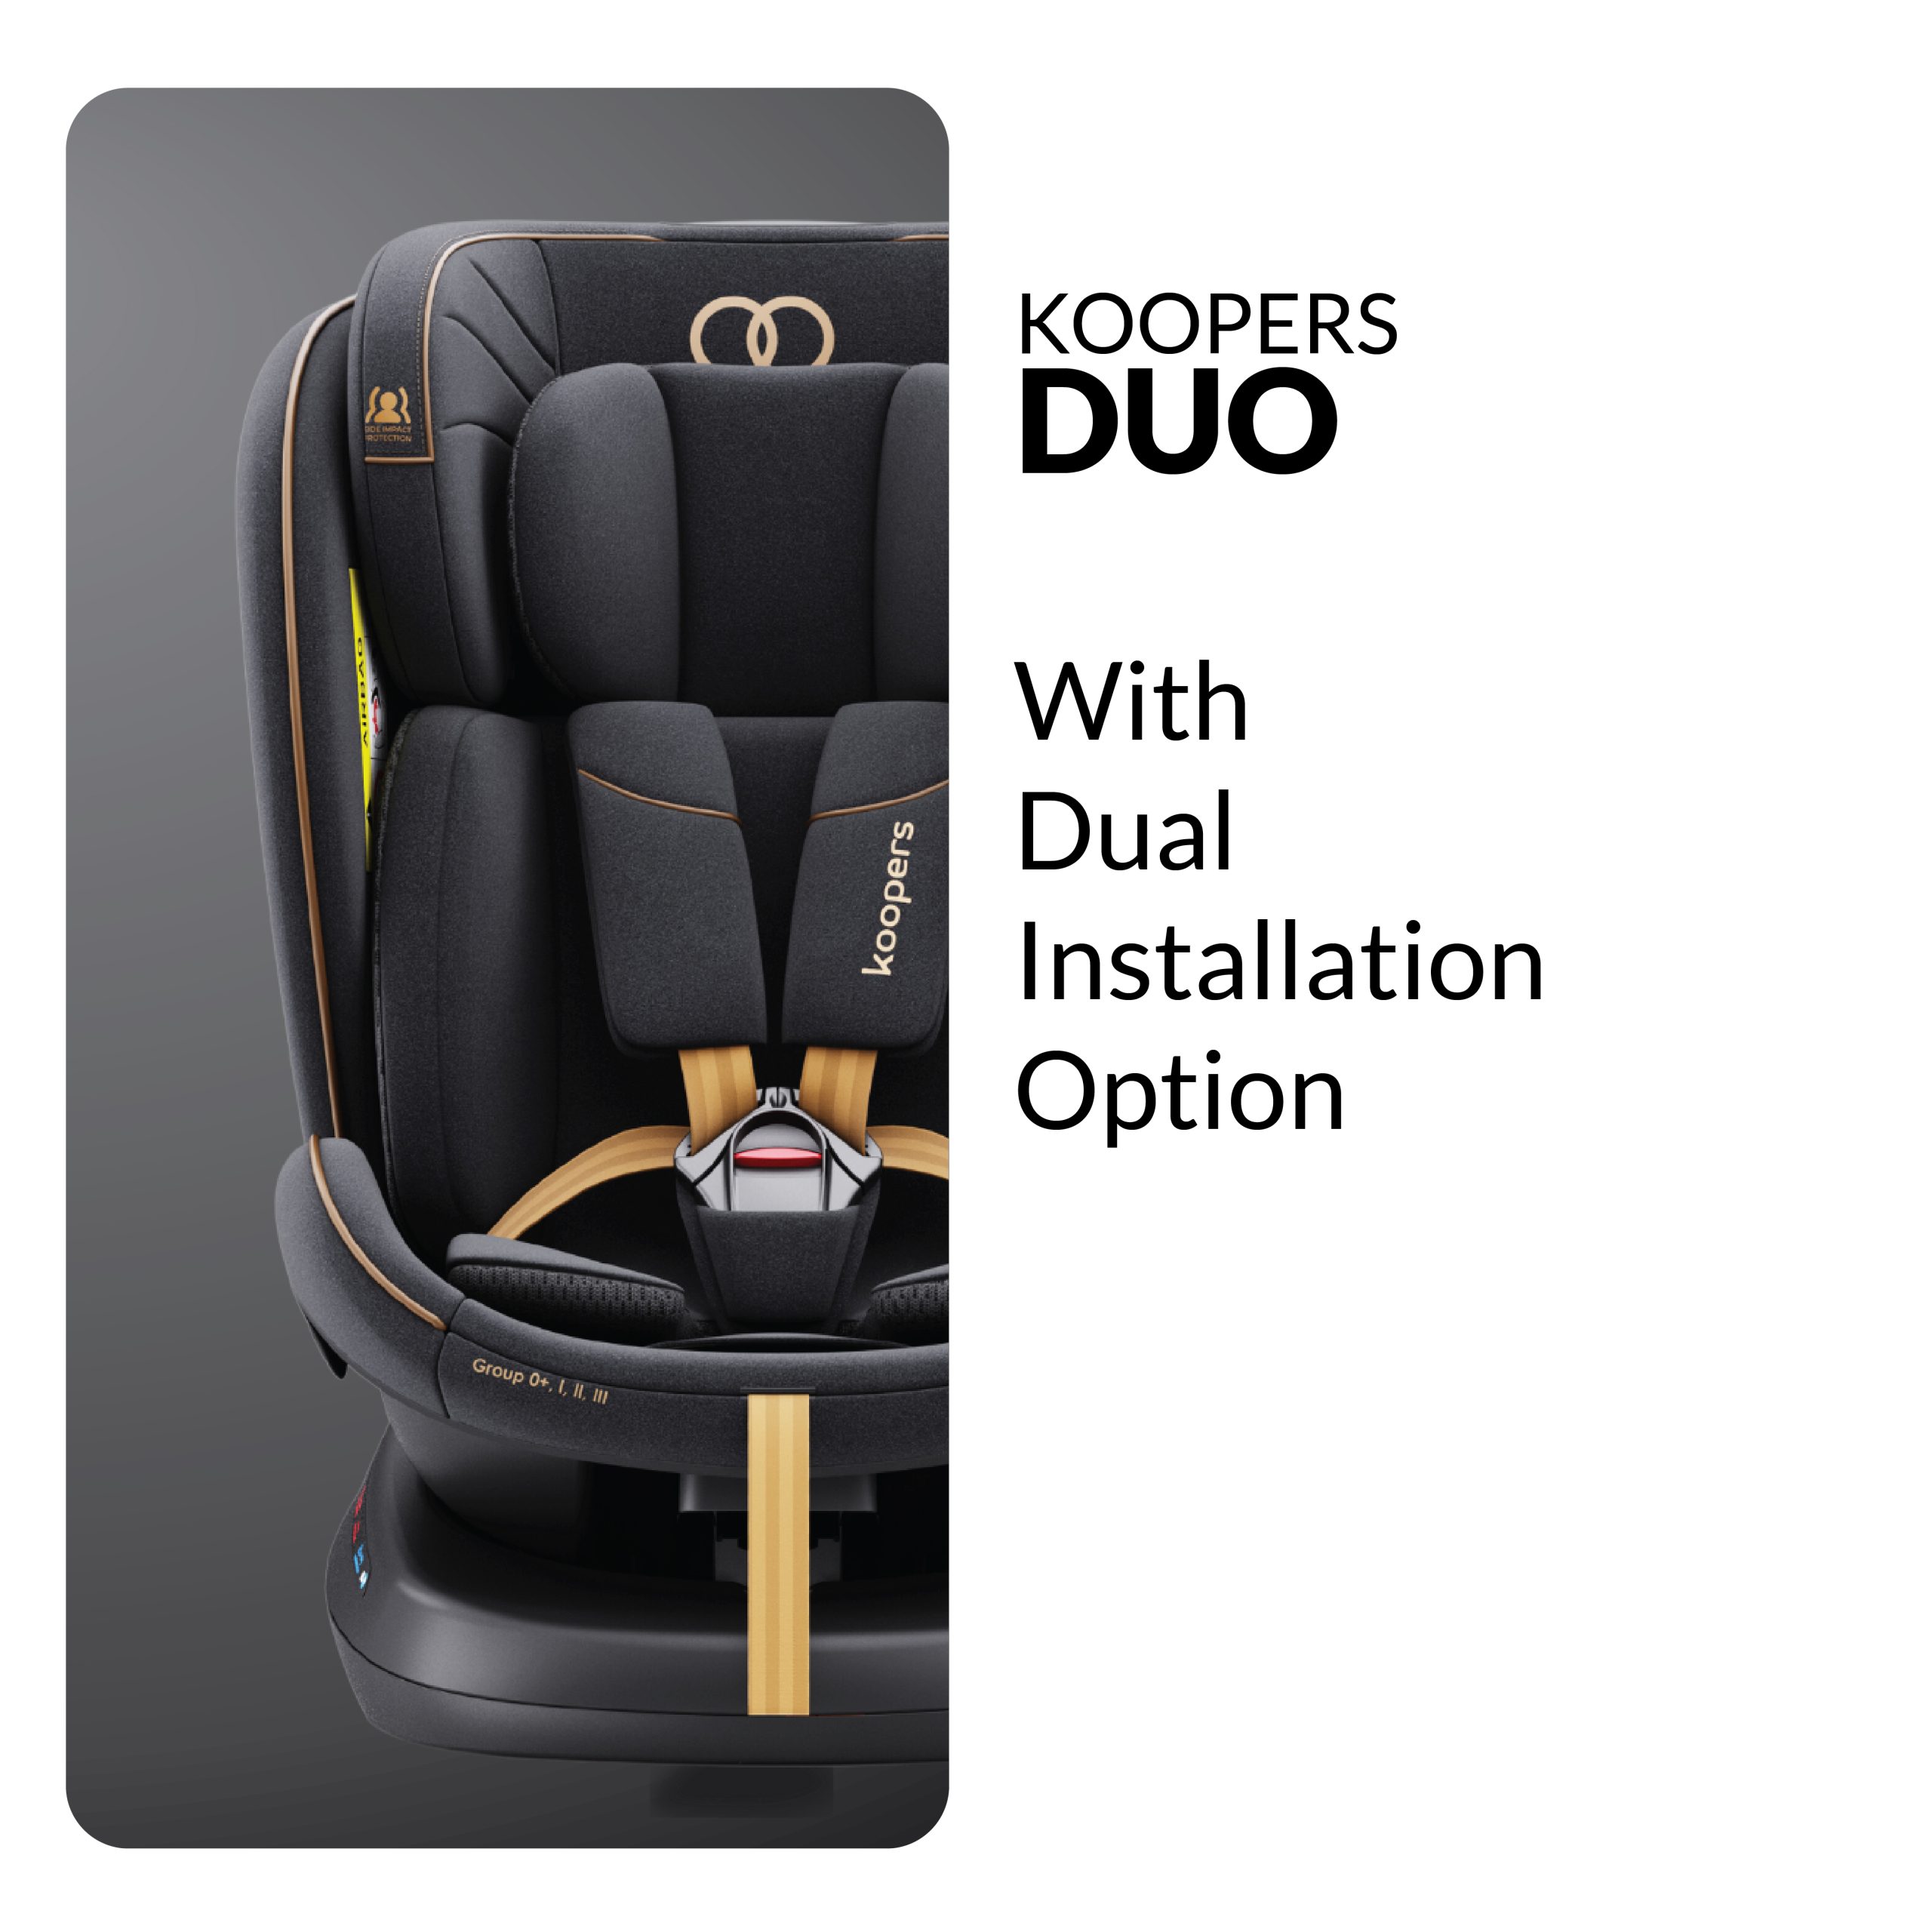 Koopers-Duo-Baby-Car-Seat-1-scaled